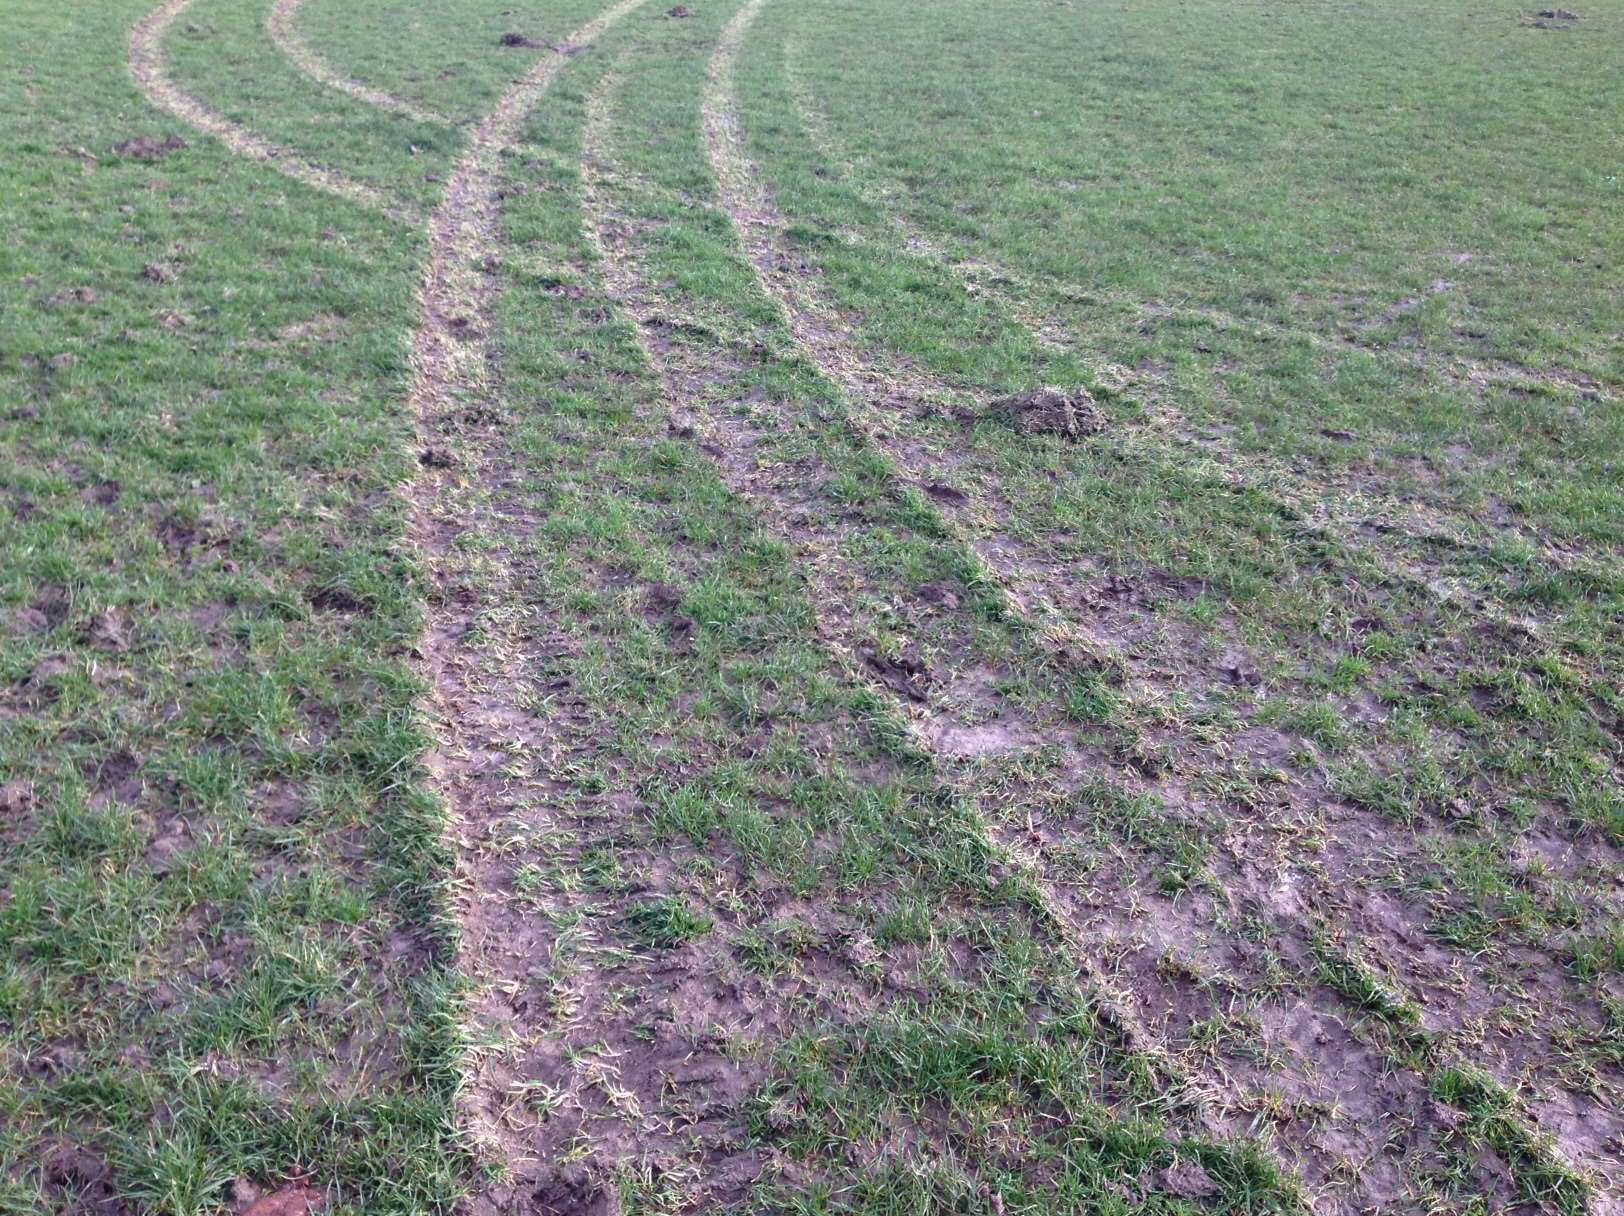 Lordswood FC youth football pitches were ruined when vandals broke in with a 4x4 vehicle